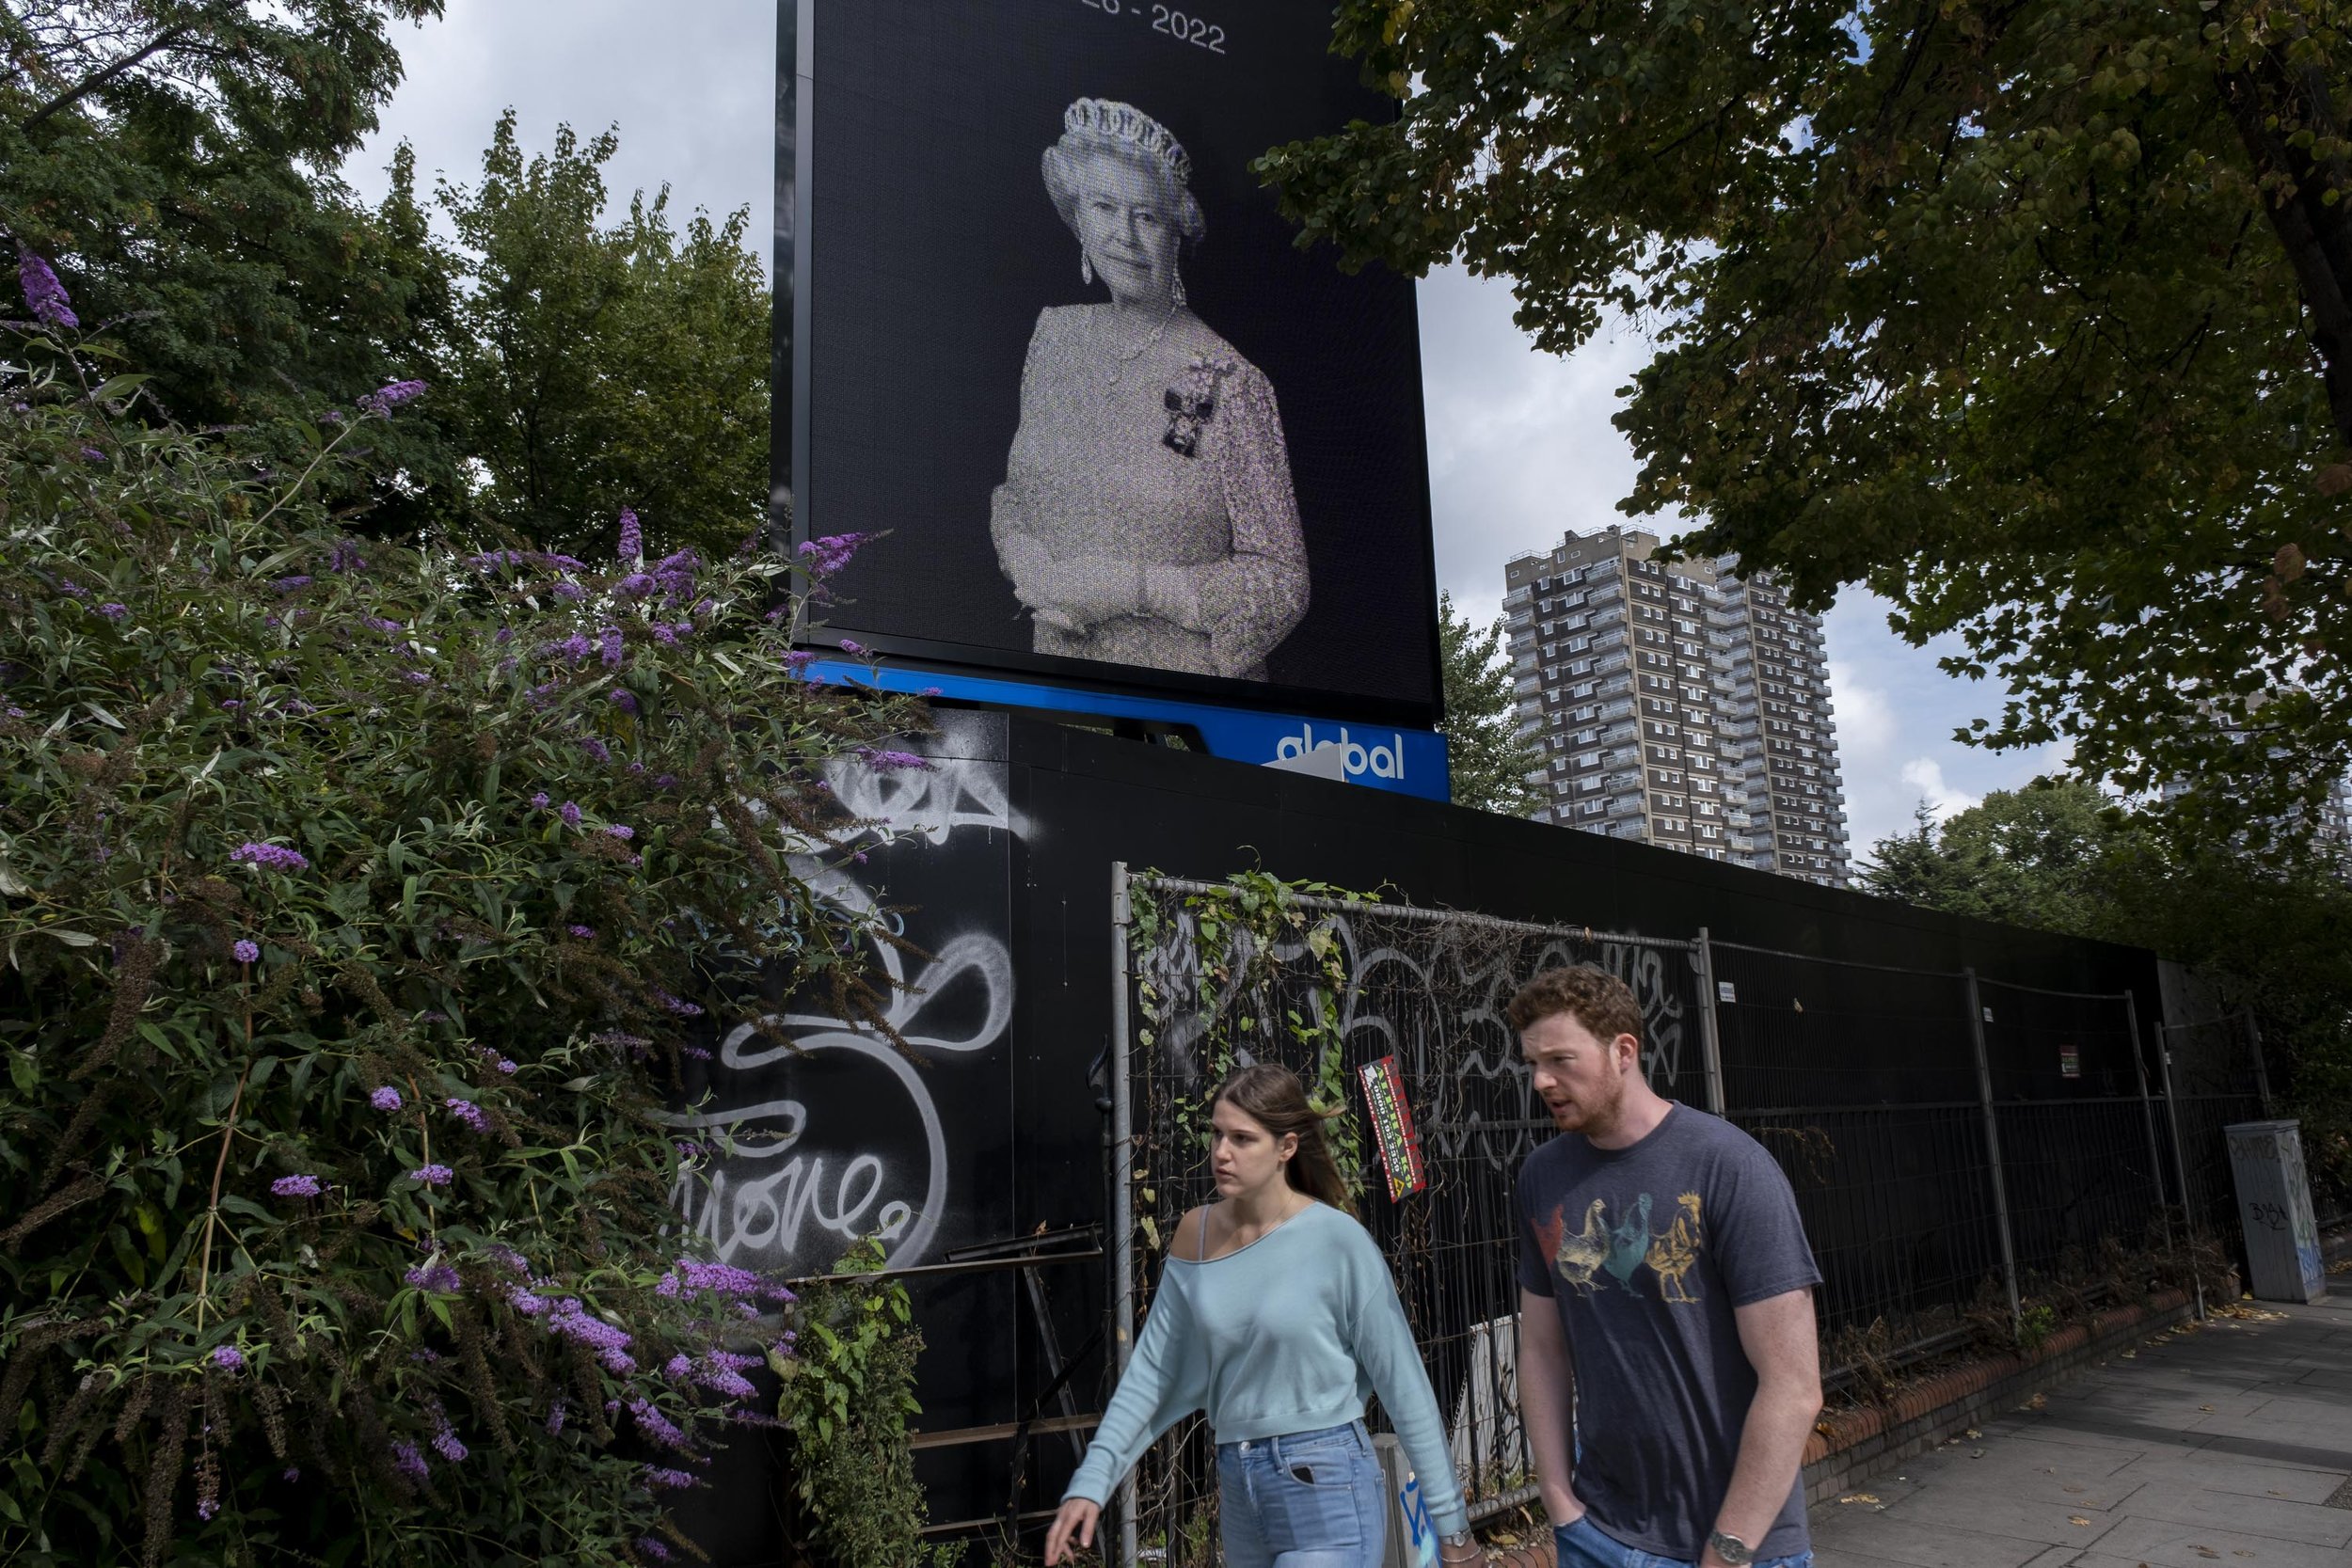  Advertising suspended, an image of the Queen is placed on billboards. 